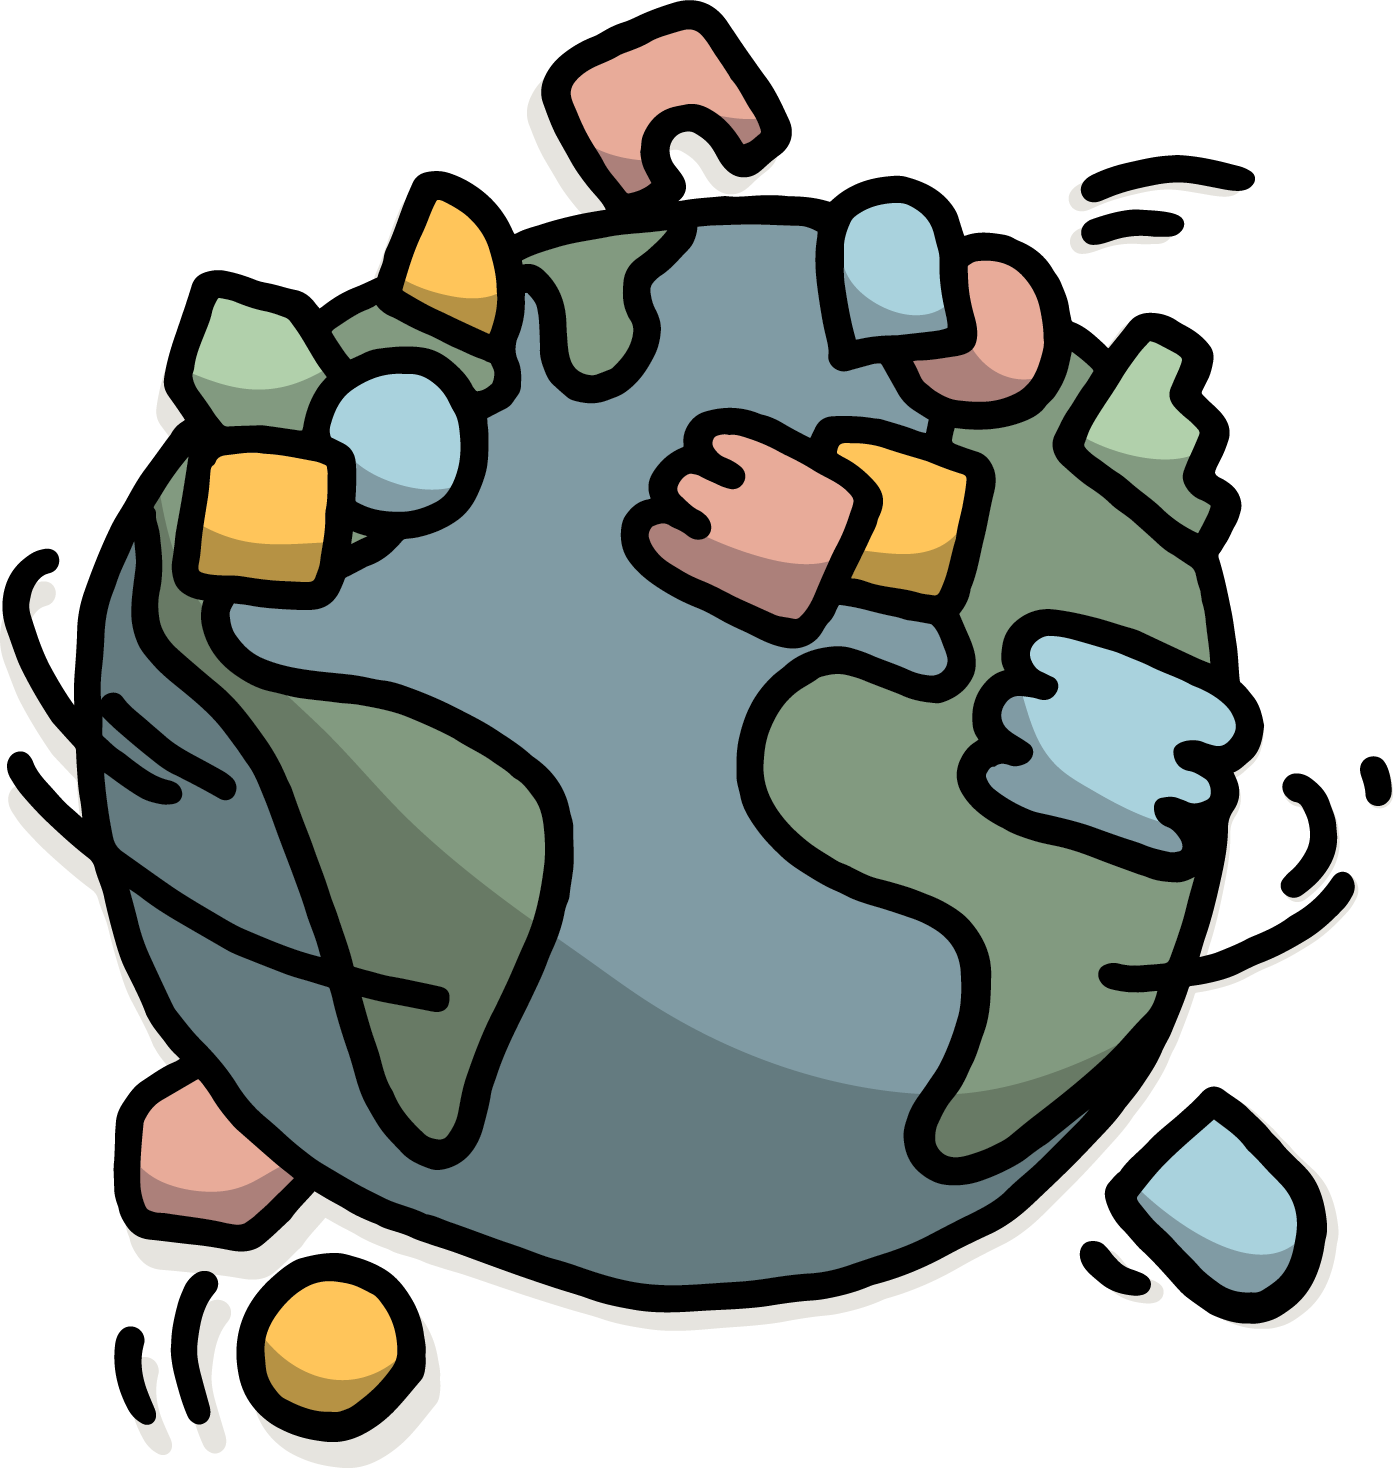 A colorful and abstract globe icon